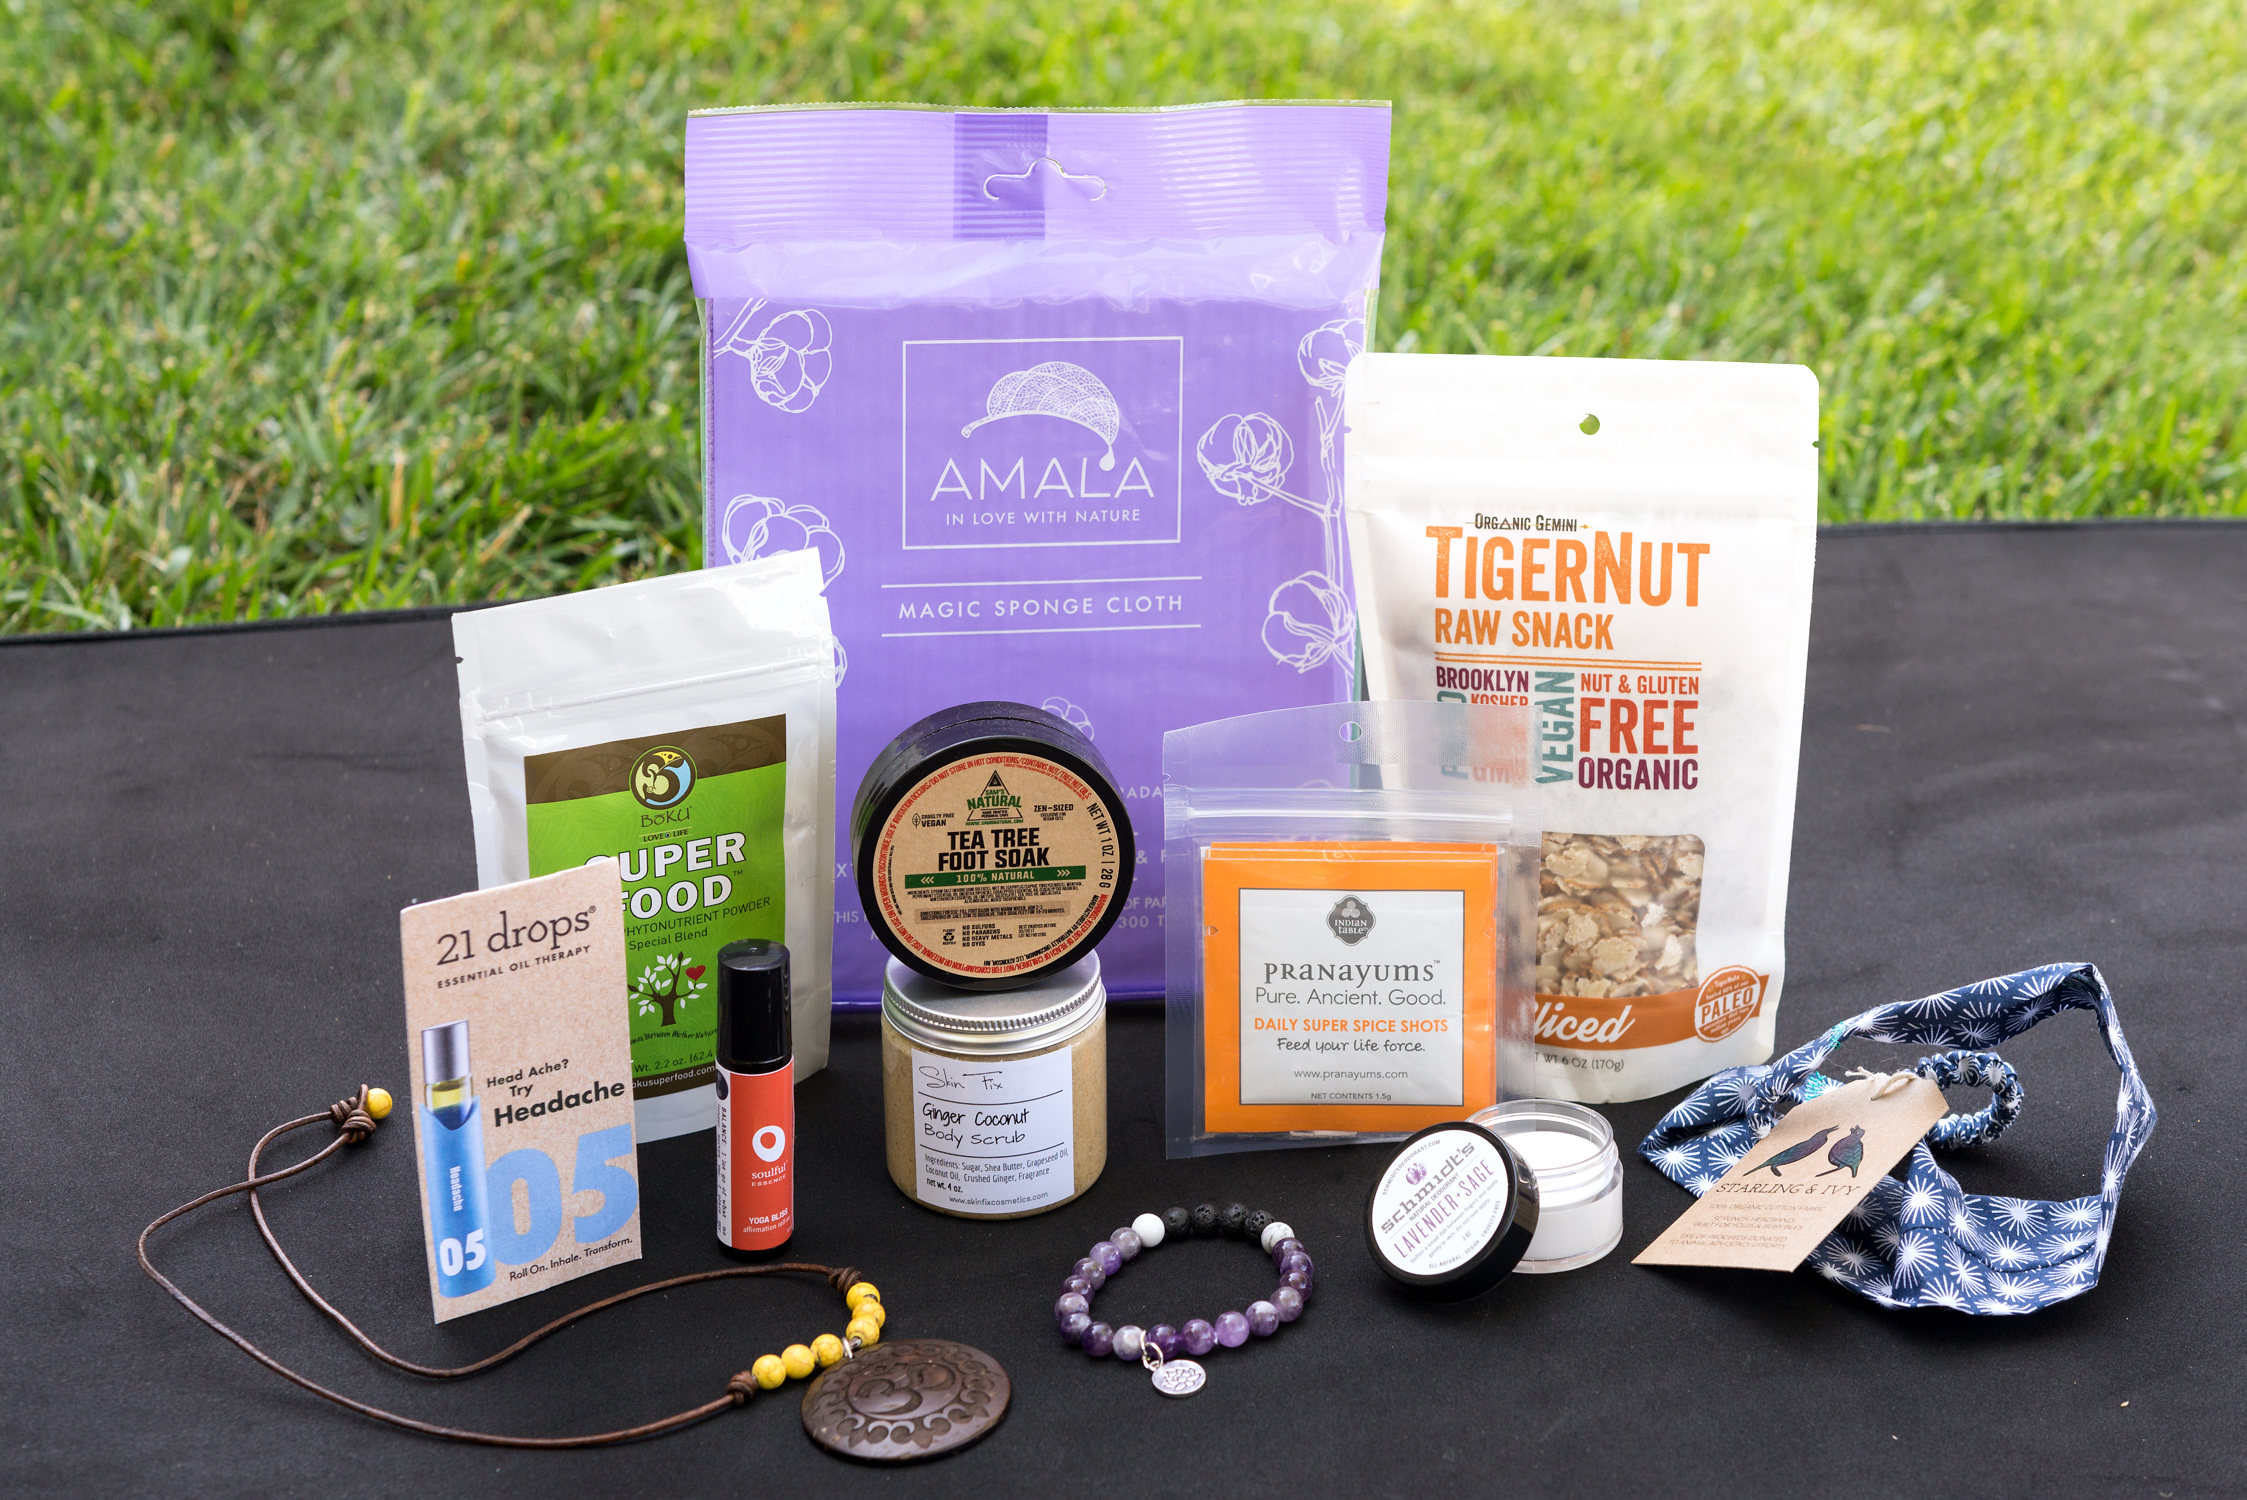 New From Vegan Cuts – One-time Yoga Box